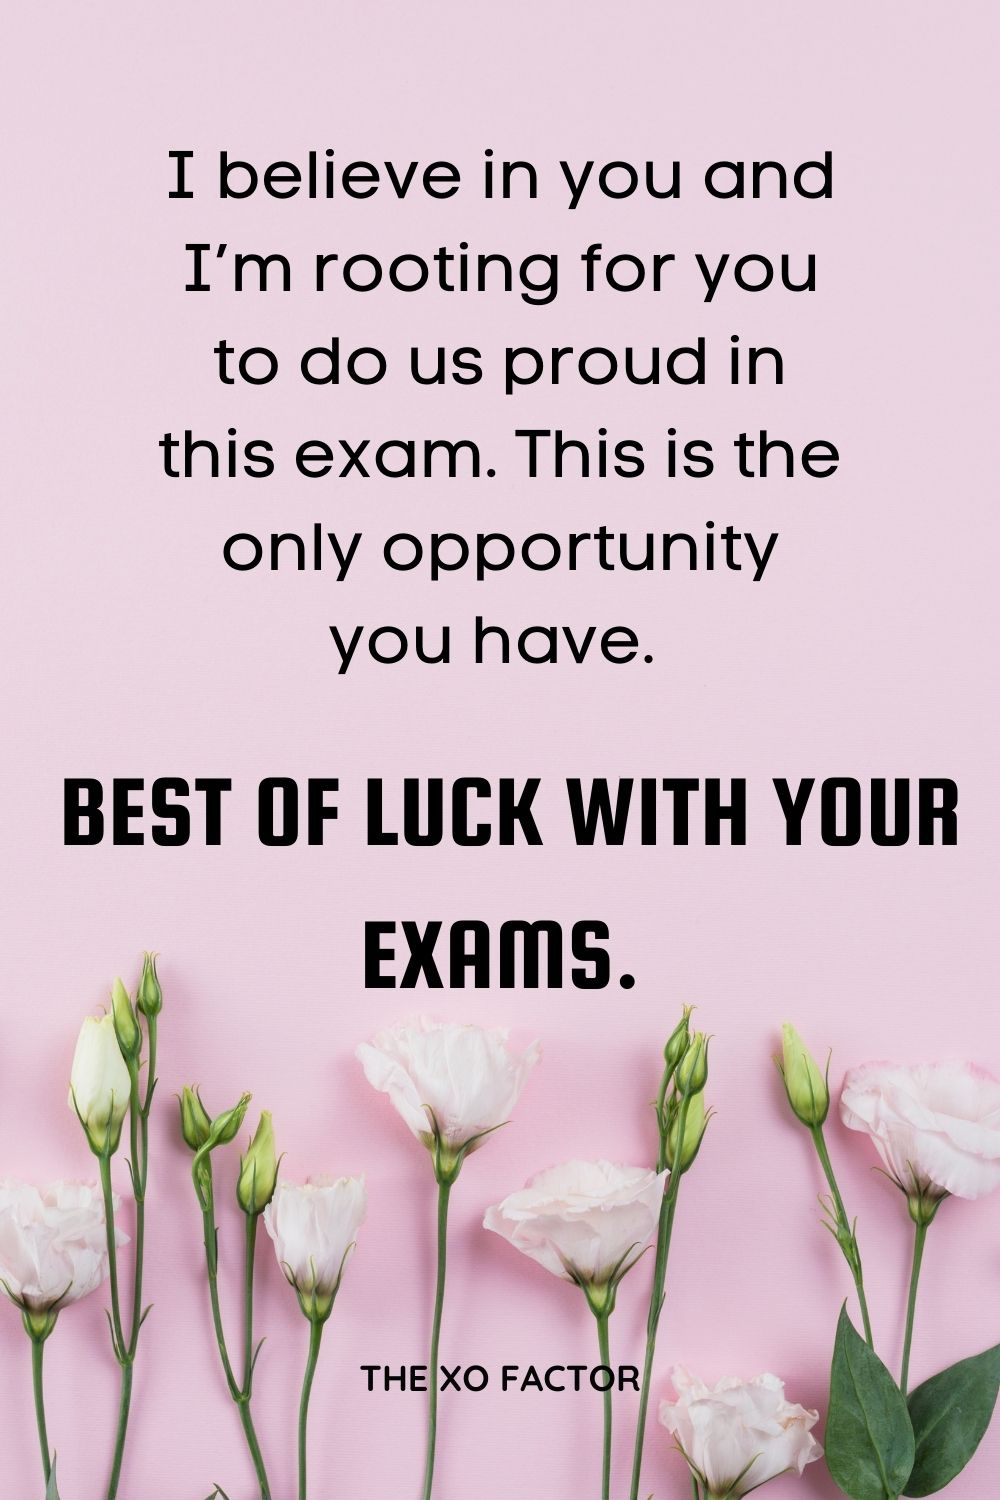 I believe in you and I’m rooting for you to do us proud in this exam. This is the only opportunity you have. Best of luck with your exams.